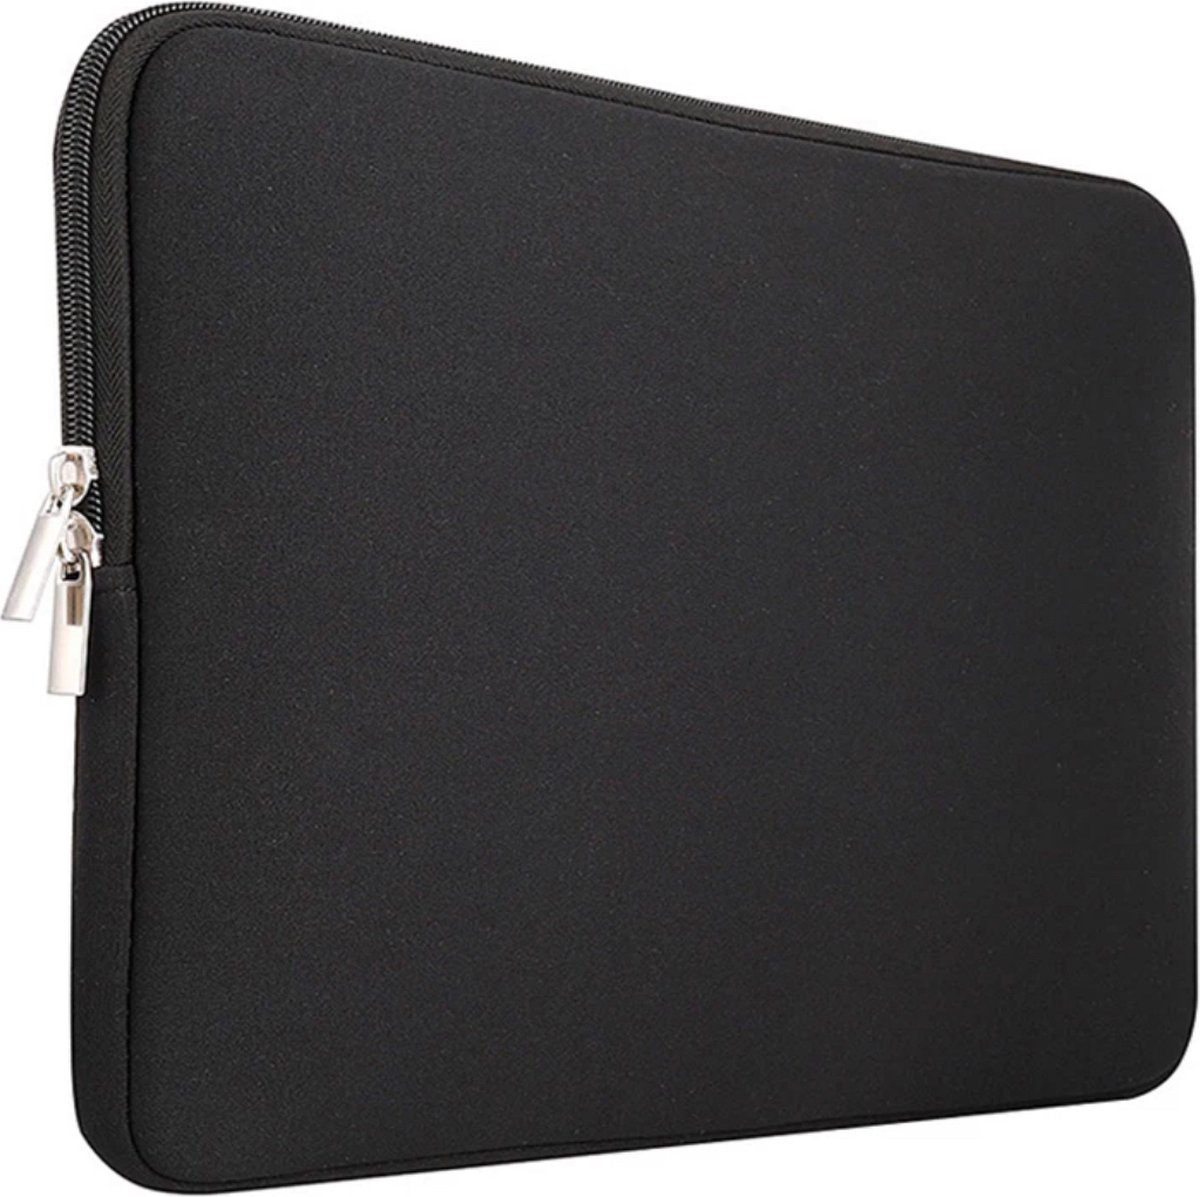 OXILO Laptophoes 15 inch Zwart - Sleeve met ritssluiting - SoftTouch - OXILO